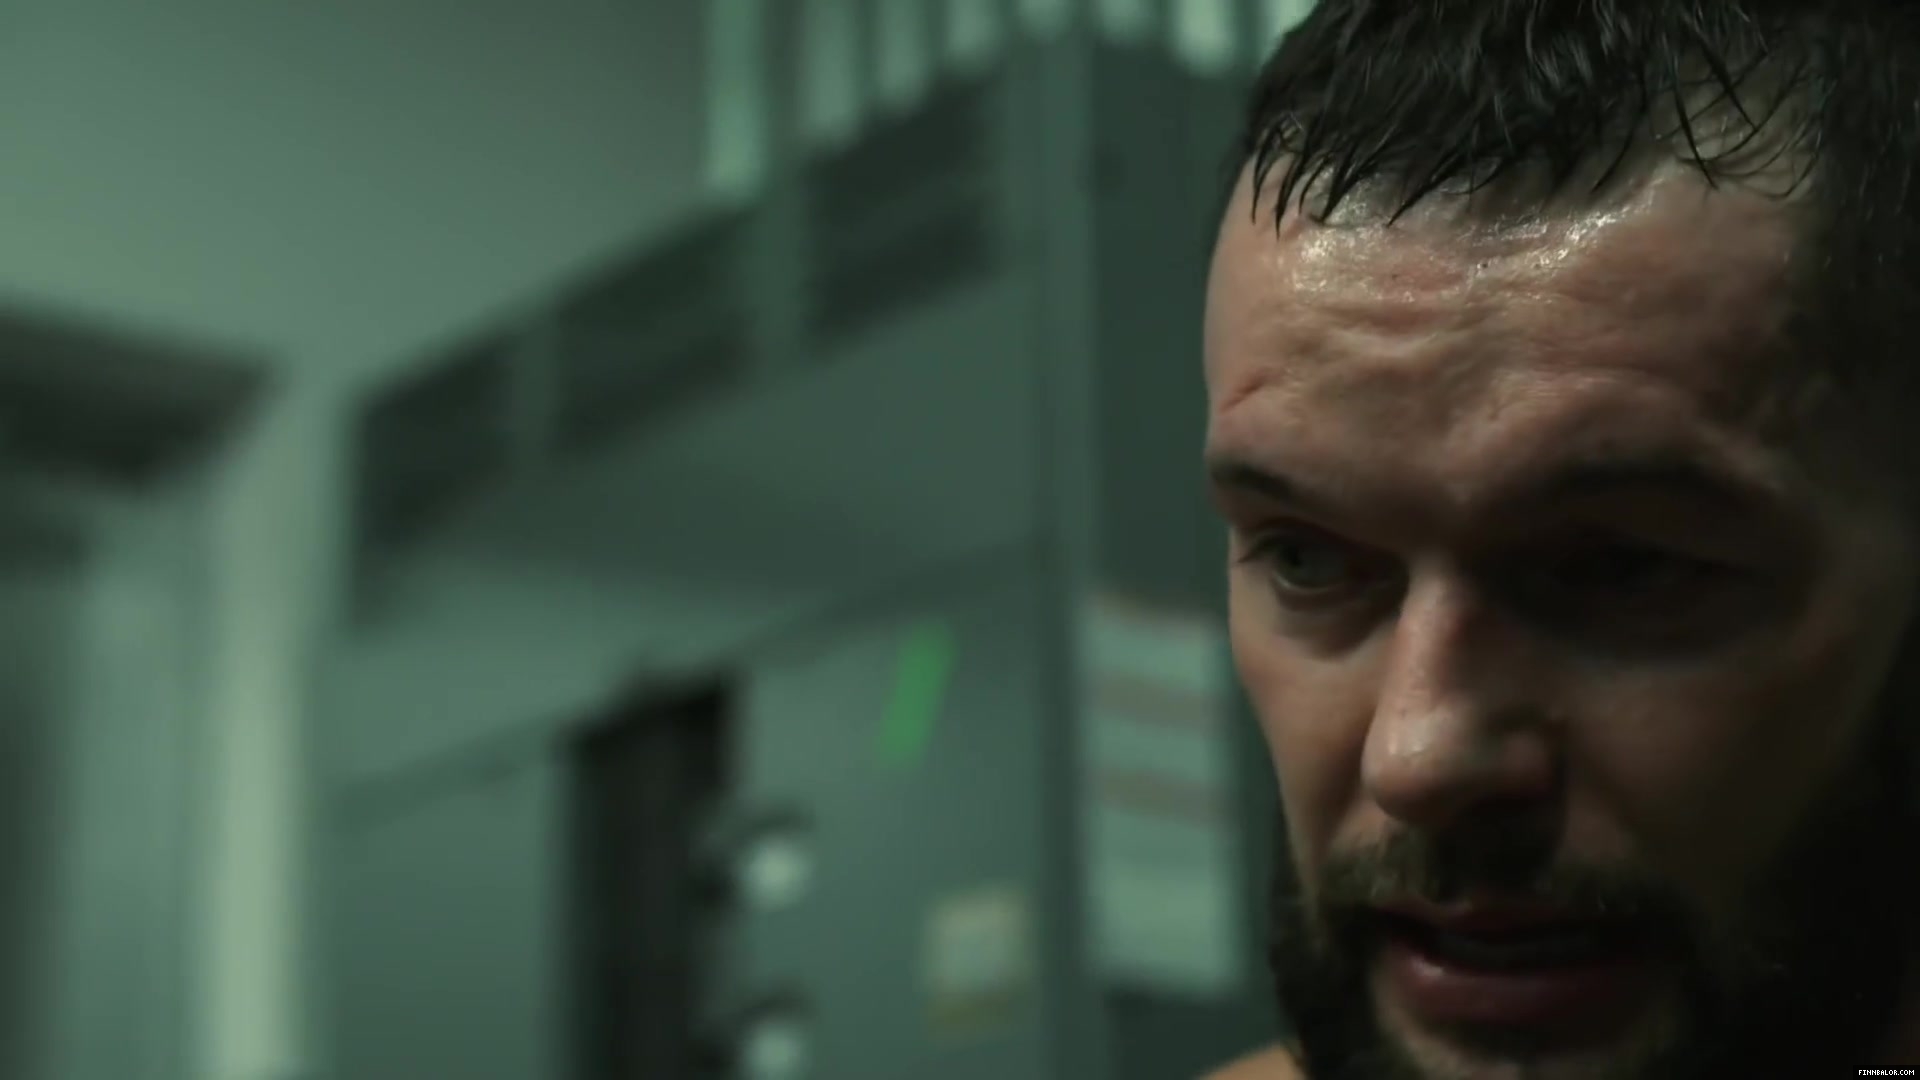 Finn_Balor___The_Rising_of_the_Prince_in_NXT_284.jpg